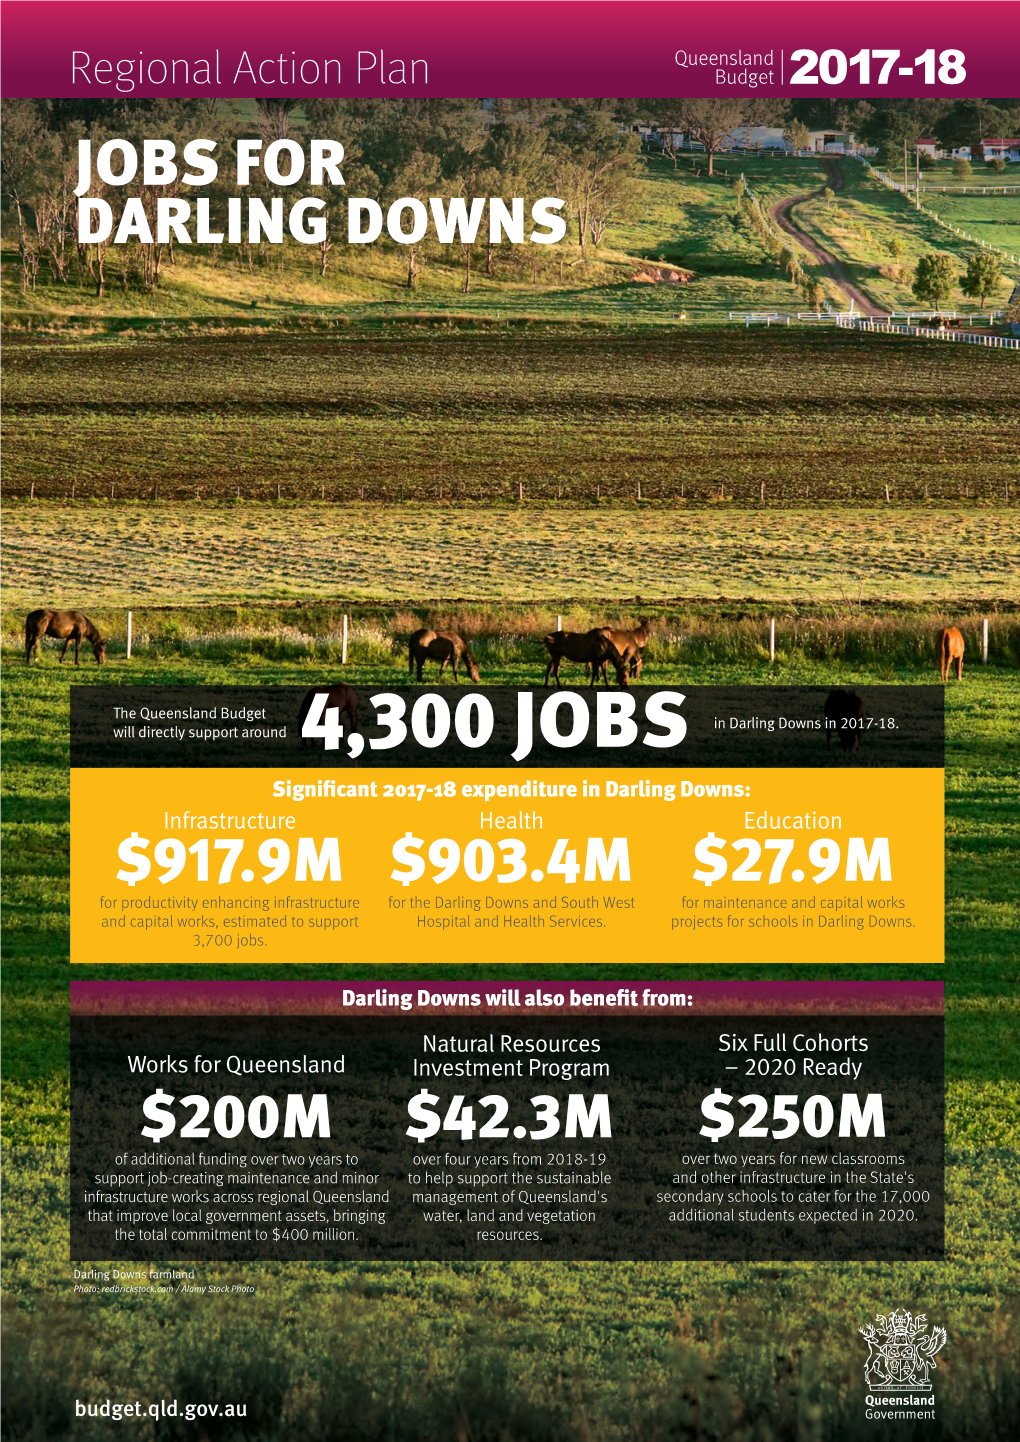 DARLING DOWNS Courtesy of Qualipac Courtesy Photo